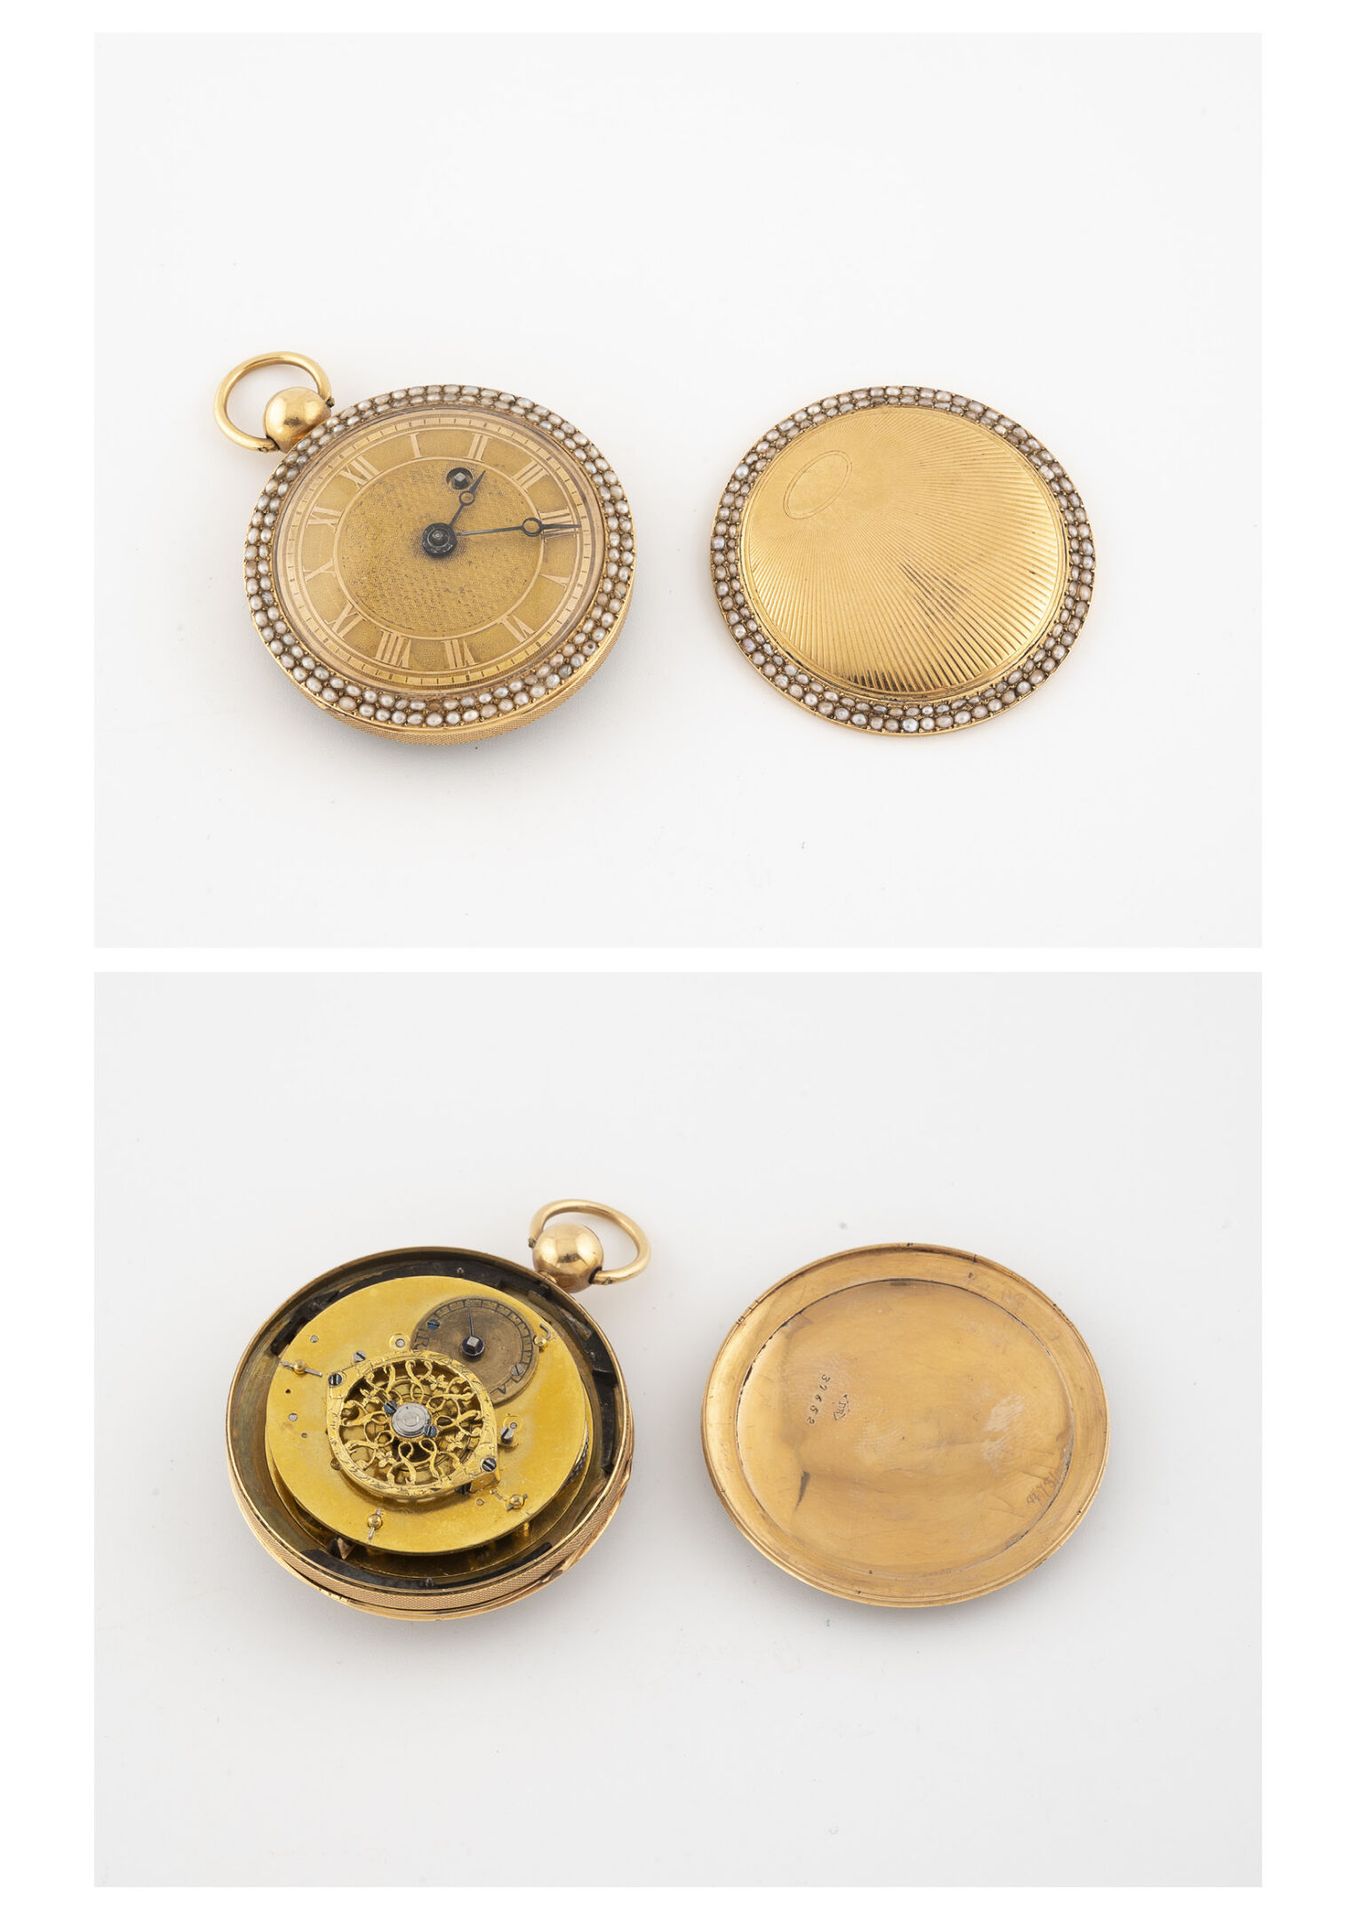 Null Yellow gold (750) pocket watch.

Guilloché back cover with radiating decora&hellip;